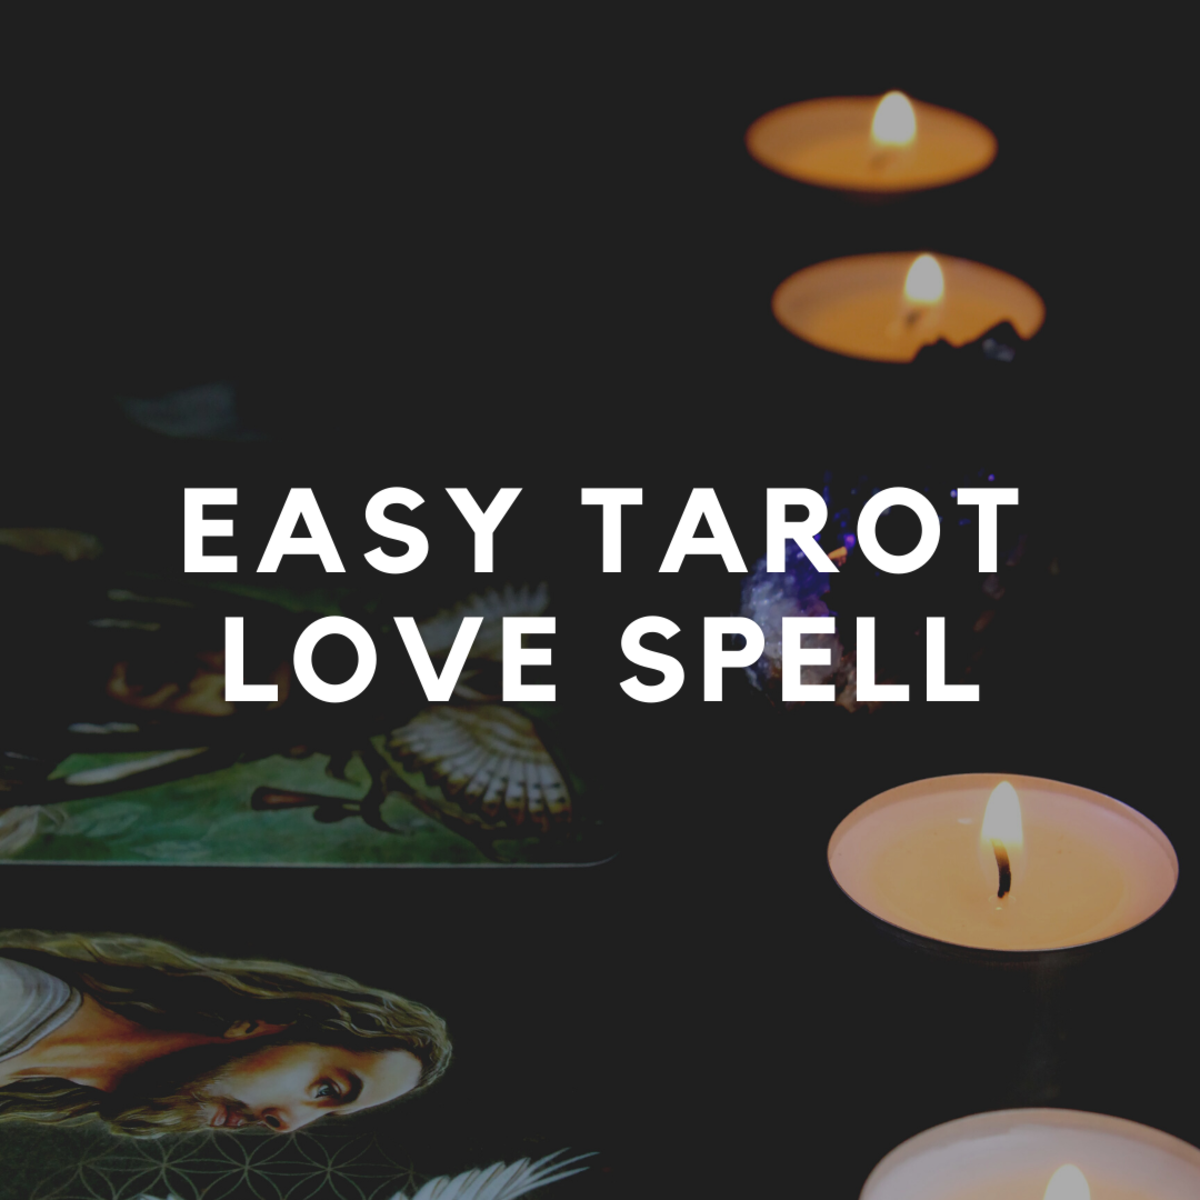 Read on to learn an easy tarot love spell. 